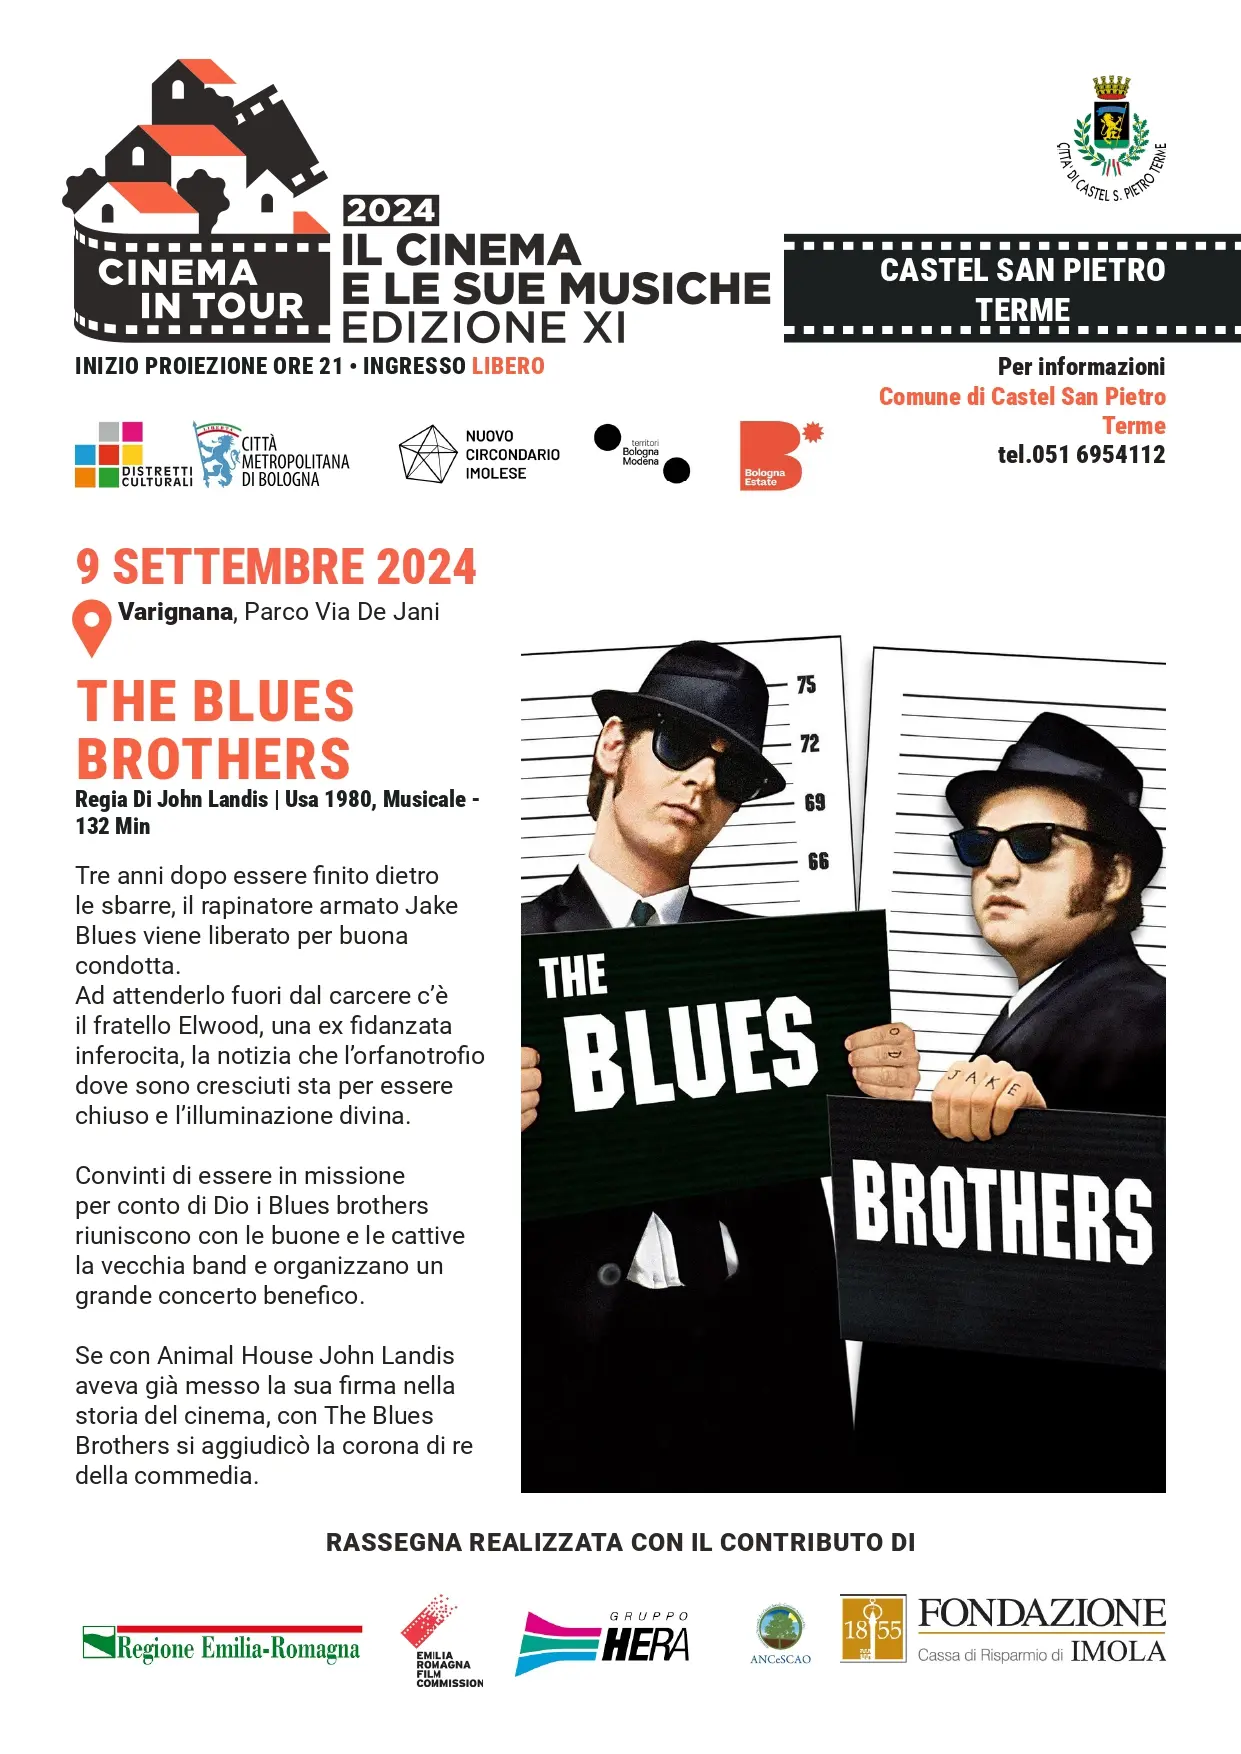 Cinema in tour: "The Blues Brothers"